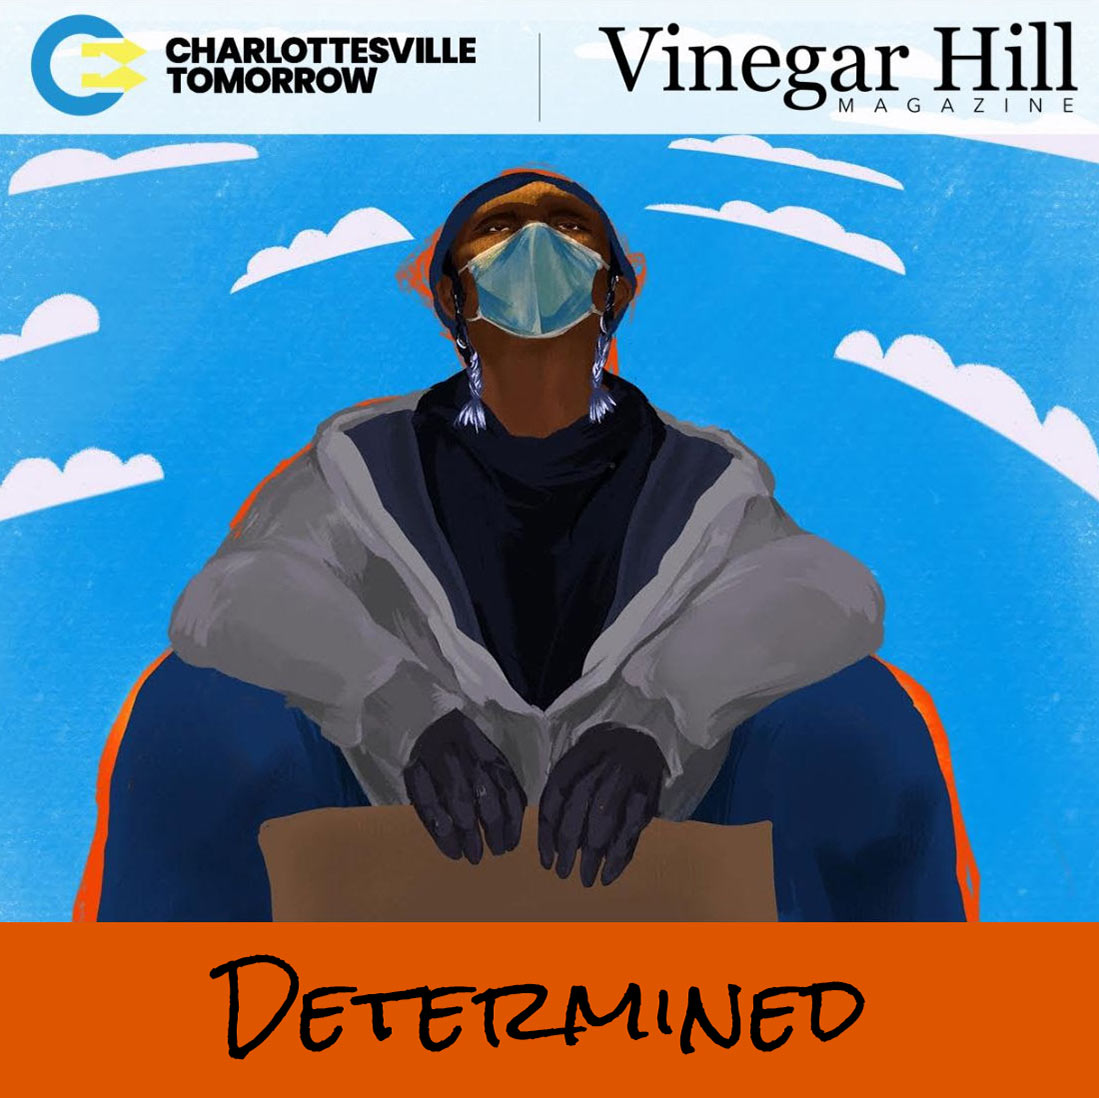 The CVille Inclusive Media and Vinegar Hill Magazine logos above a black person wearing a face mask and Determined